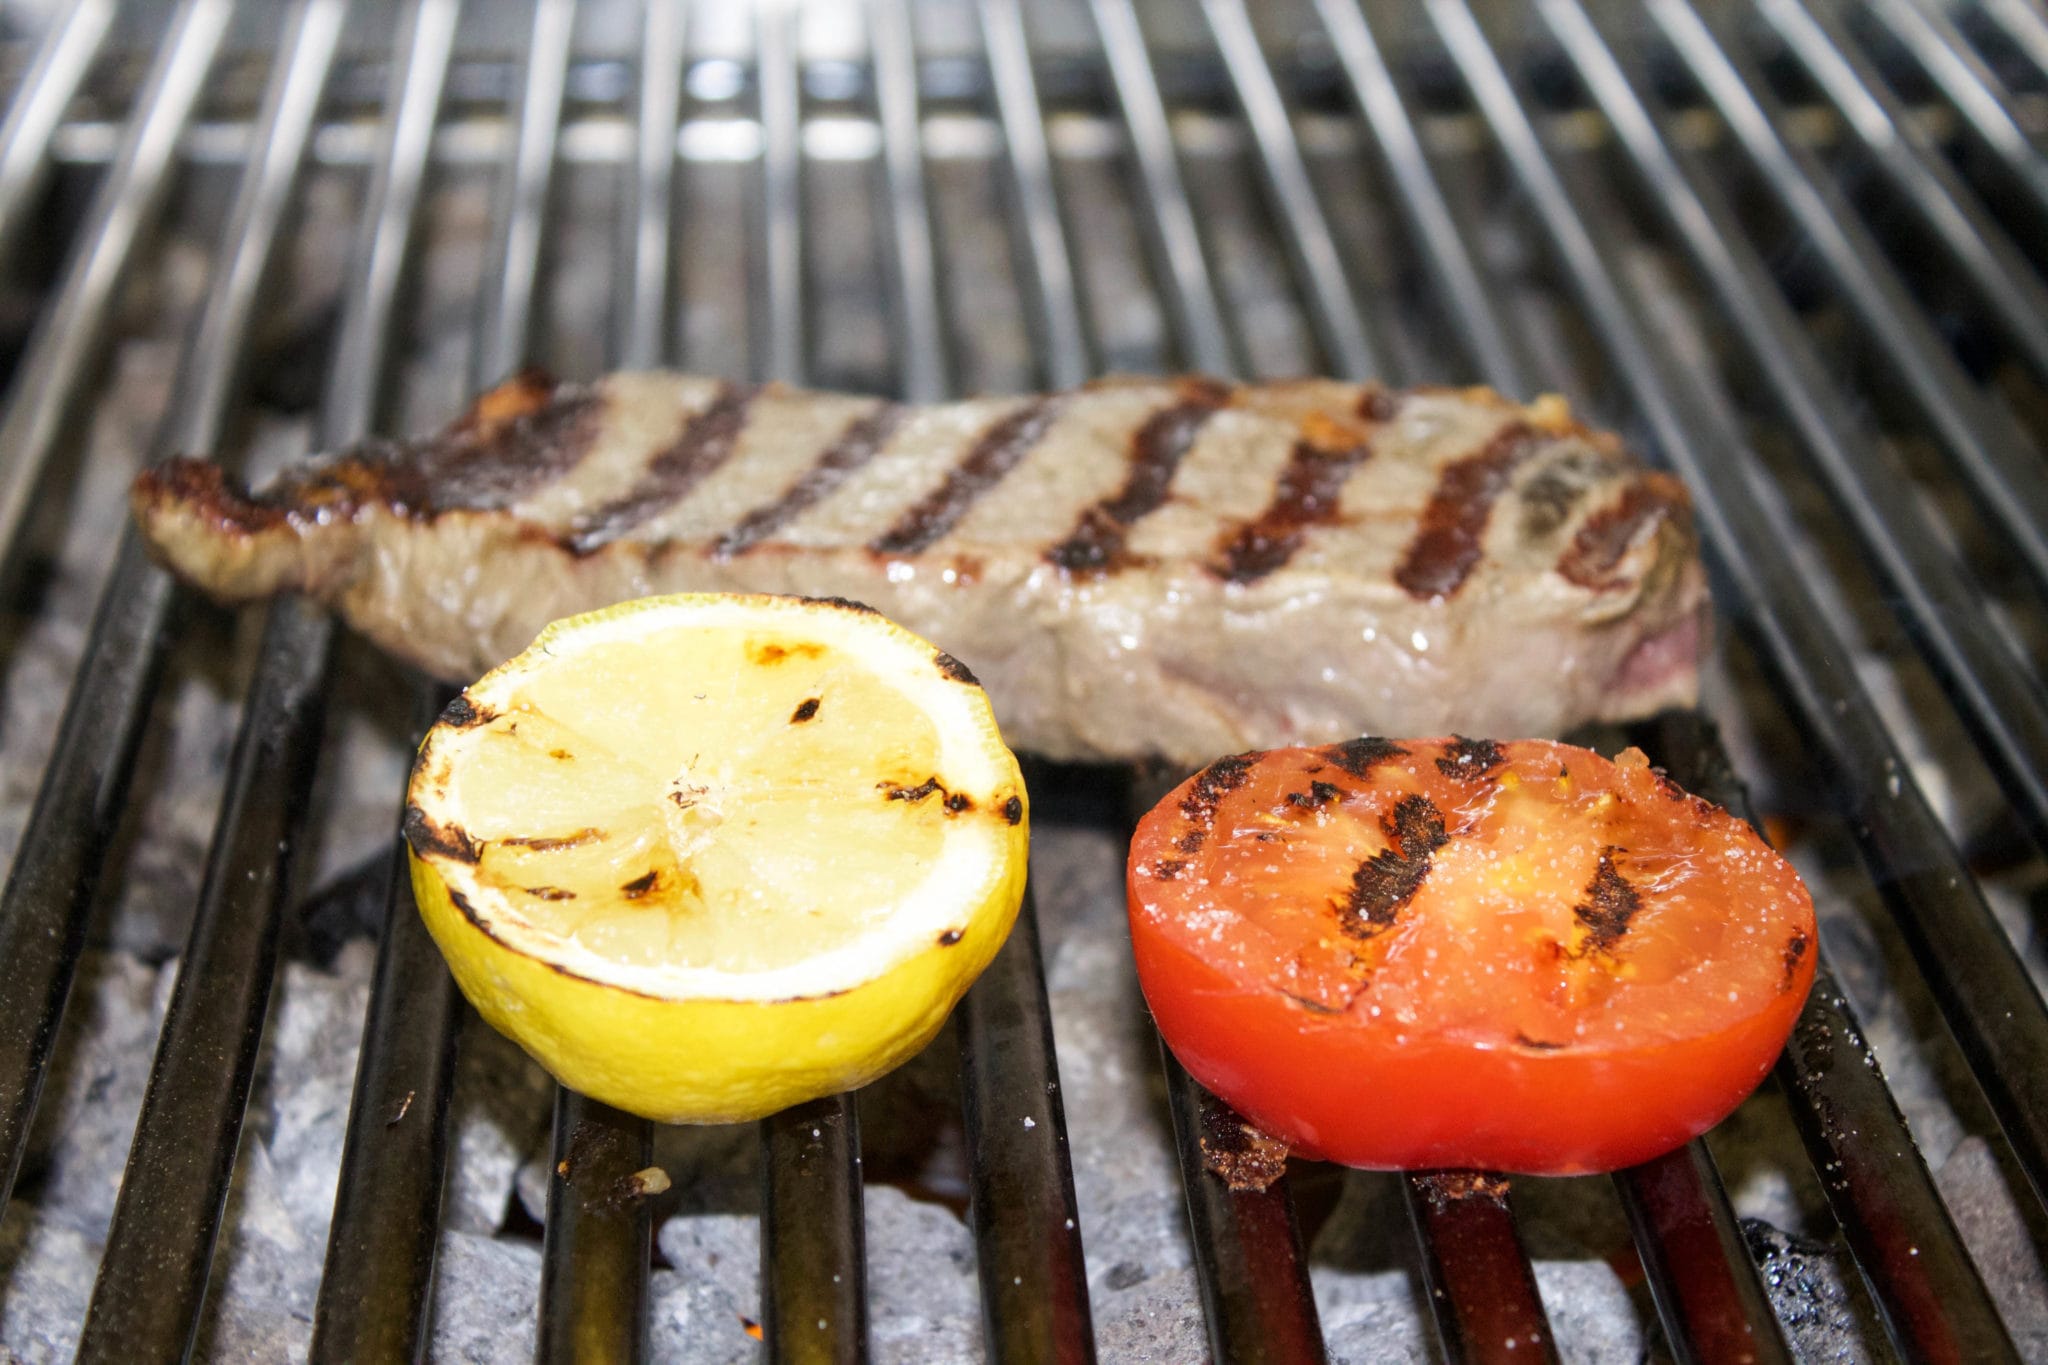 Steak on a grill with tomato and lemon